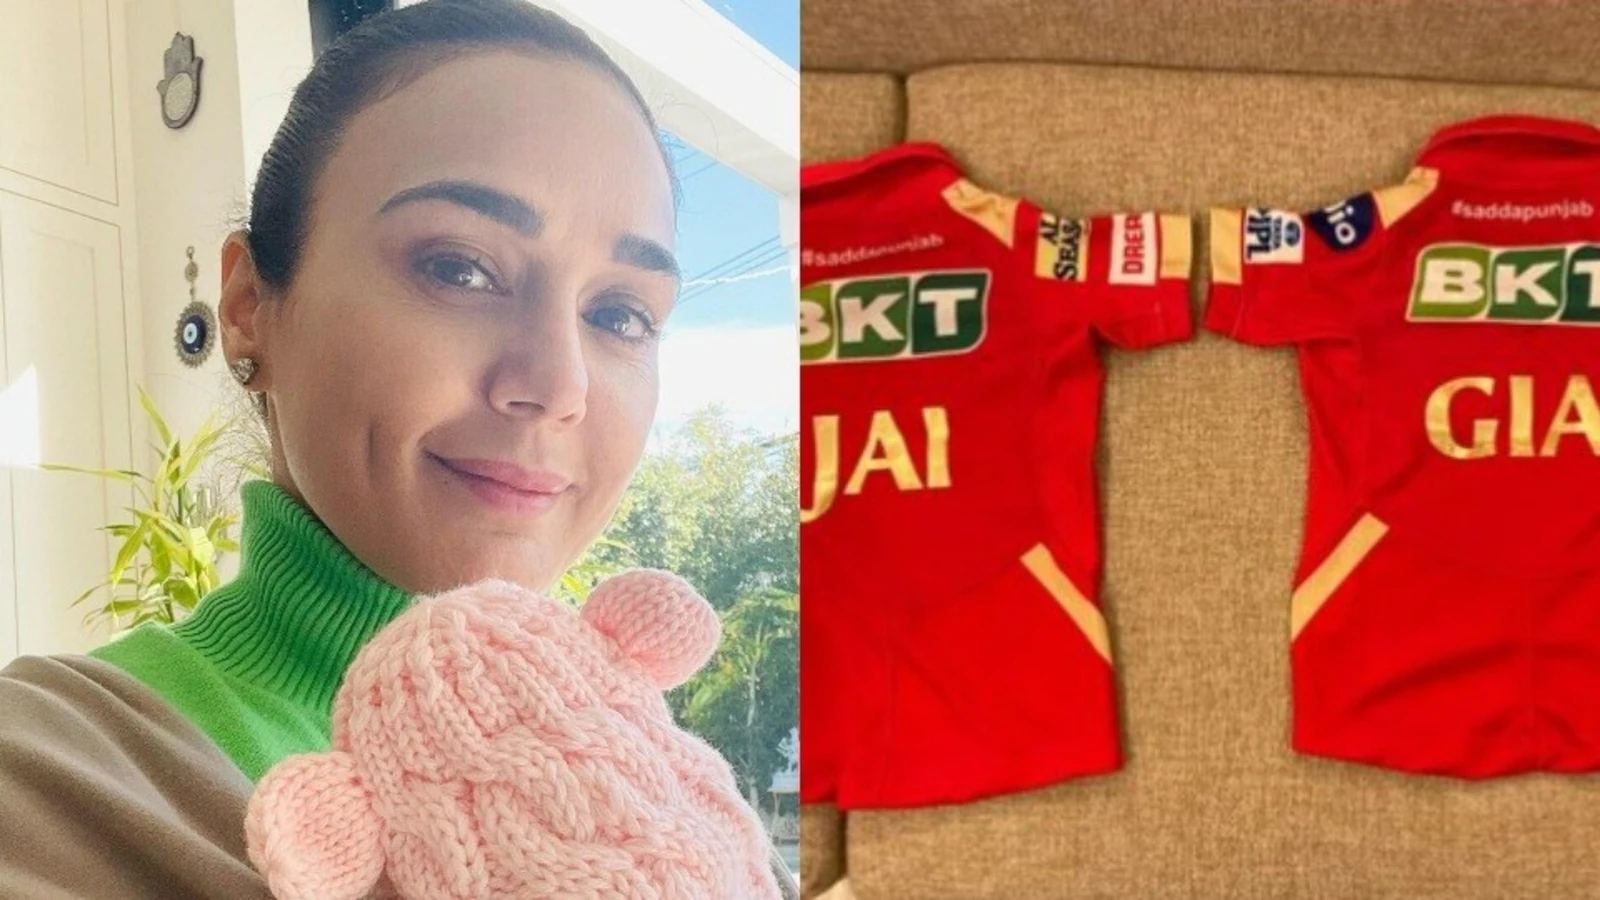 Preity Zinta is all set for ‘game day’ with special Punjab Kings jerseys for her twins Jai and Gia. See pics